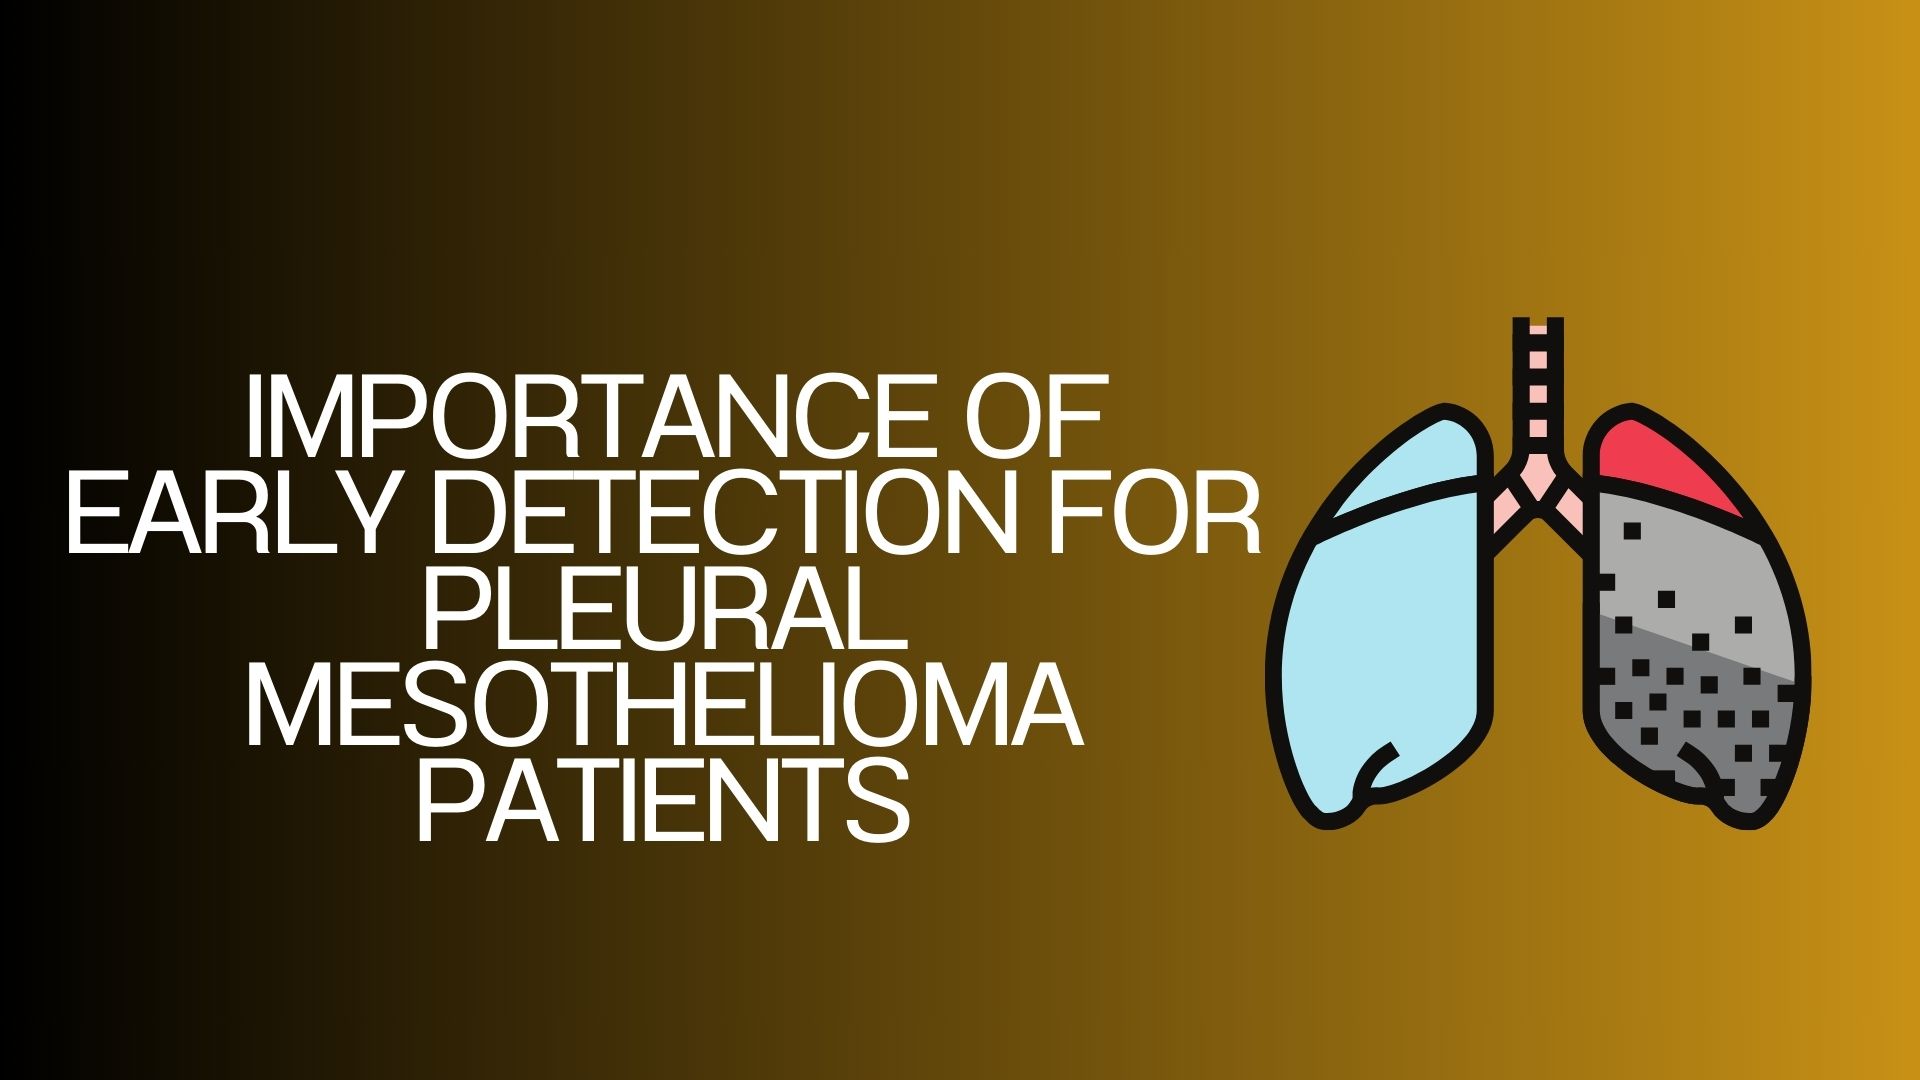 Importance of Early Detection for Pleural Mesothelioma Patients